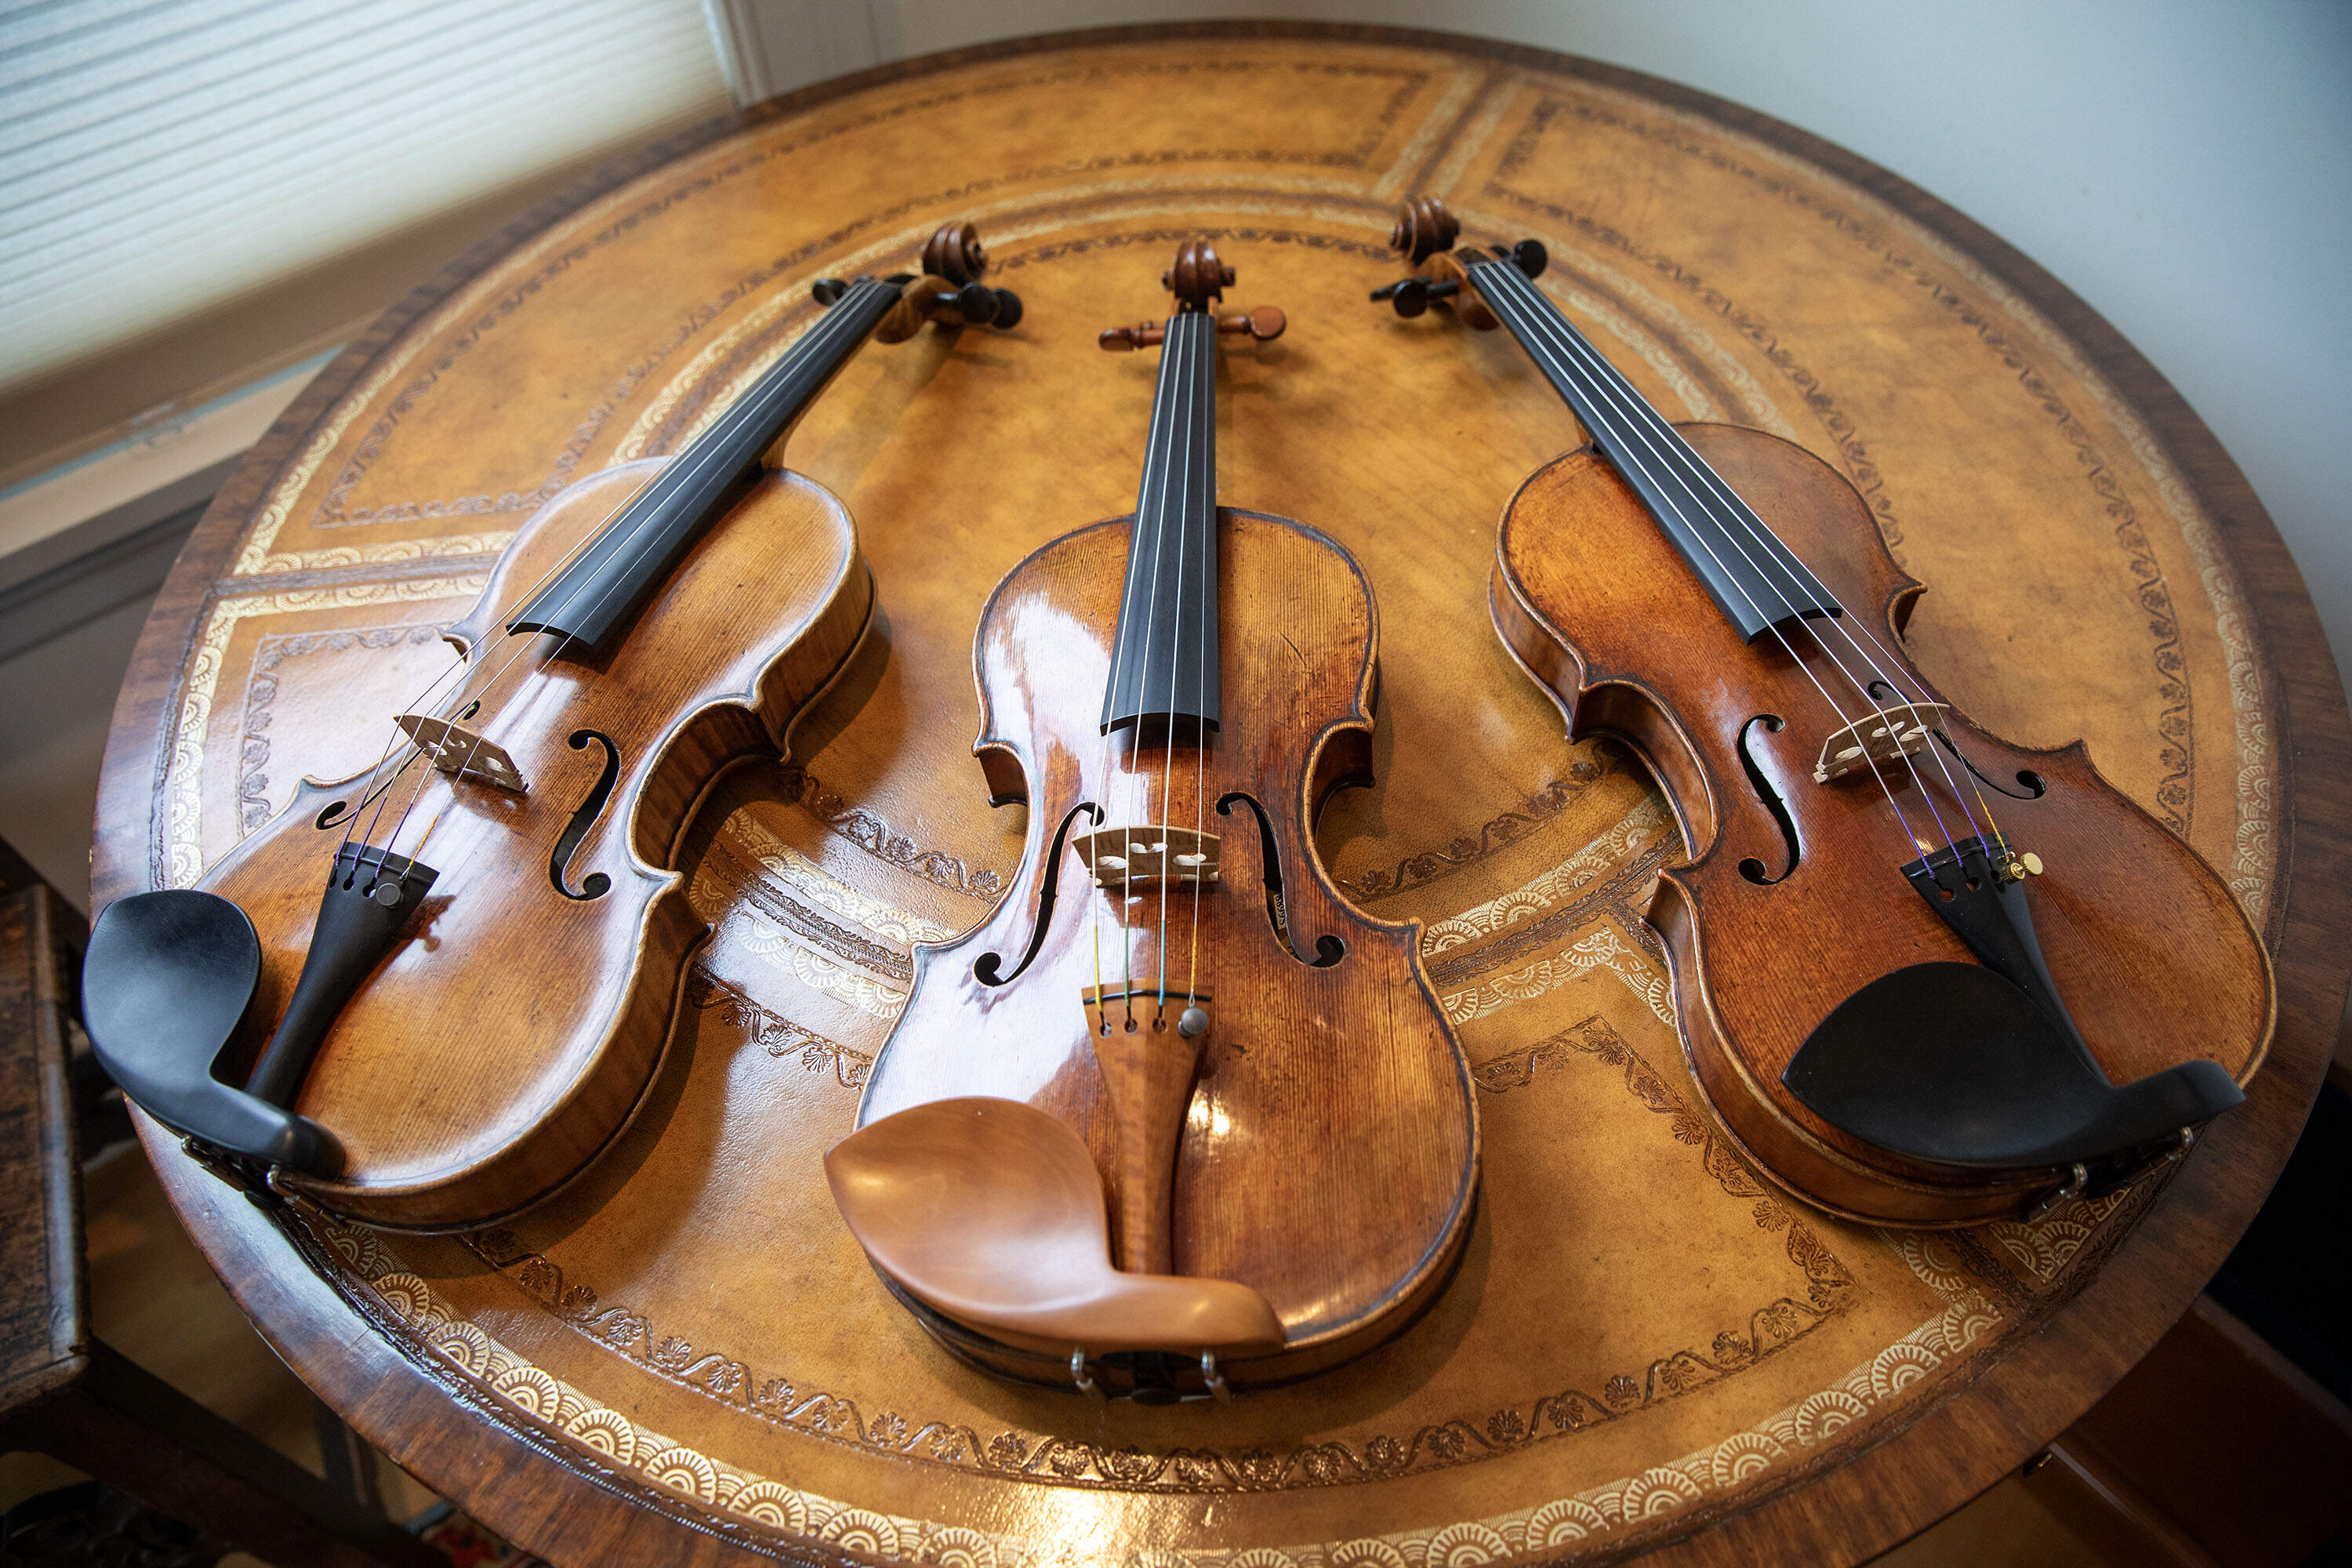 Three violins, two Carlo Bergonzis and a Giovanni Battista Guadagnini, wait to be tried out by musicians from A Far Cry at Reuning &amp; Son. (Robin Lubbock/WBUR)